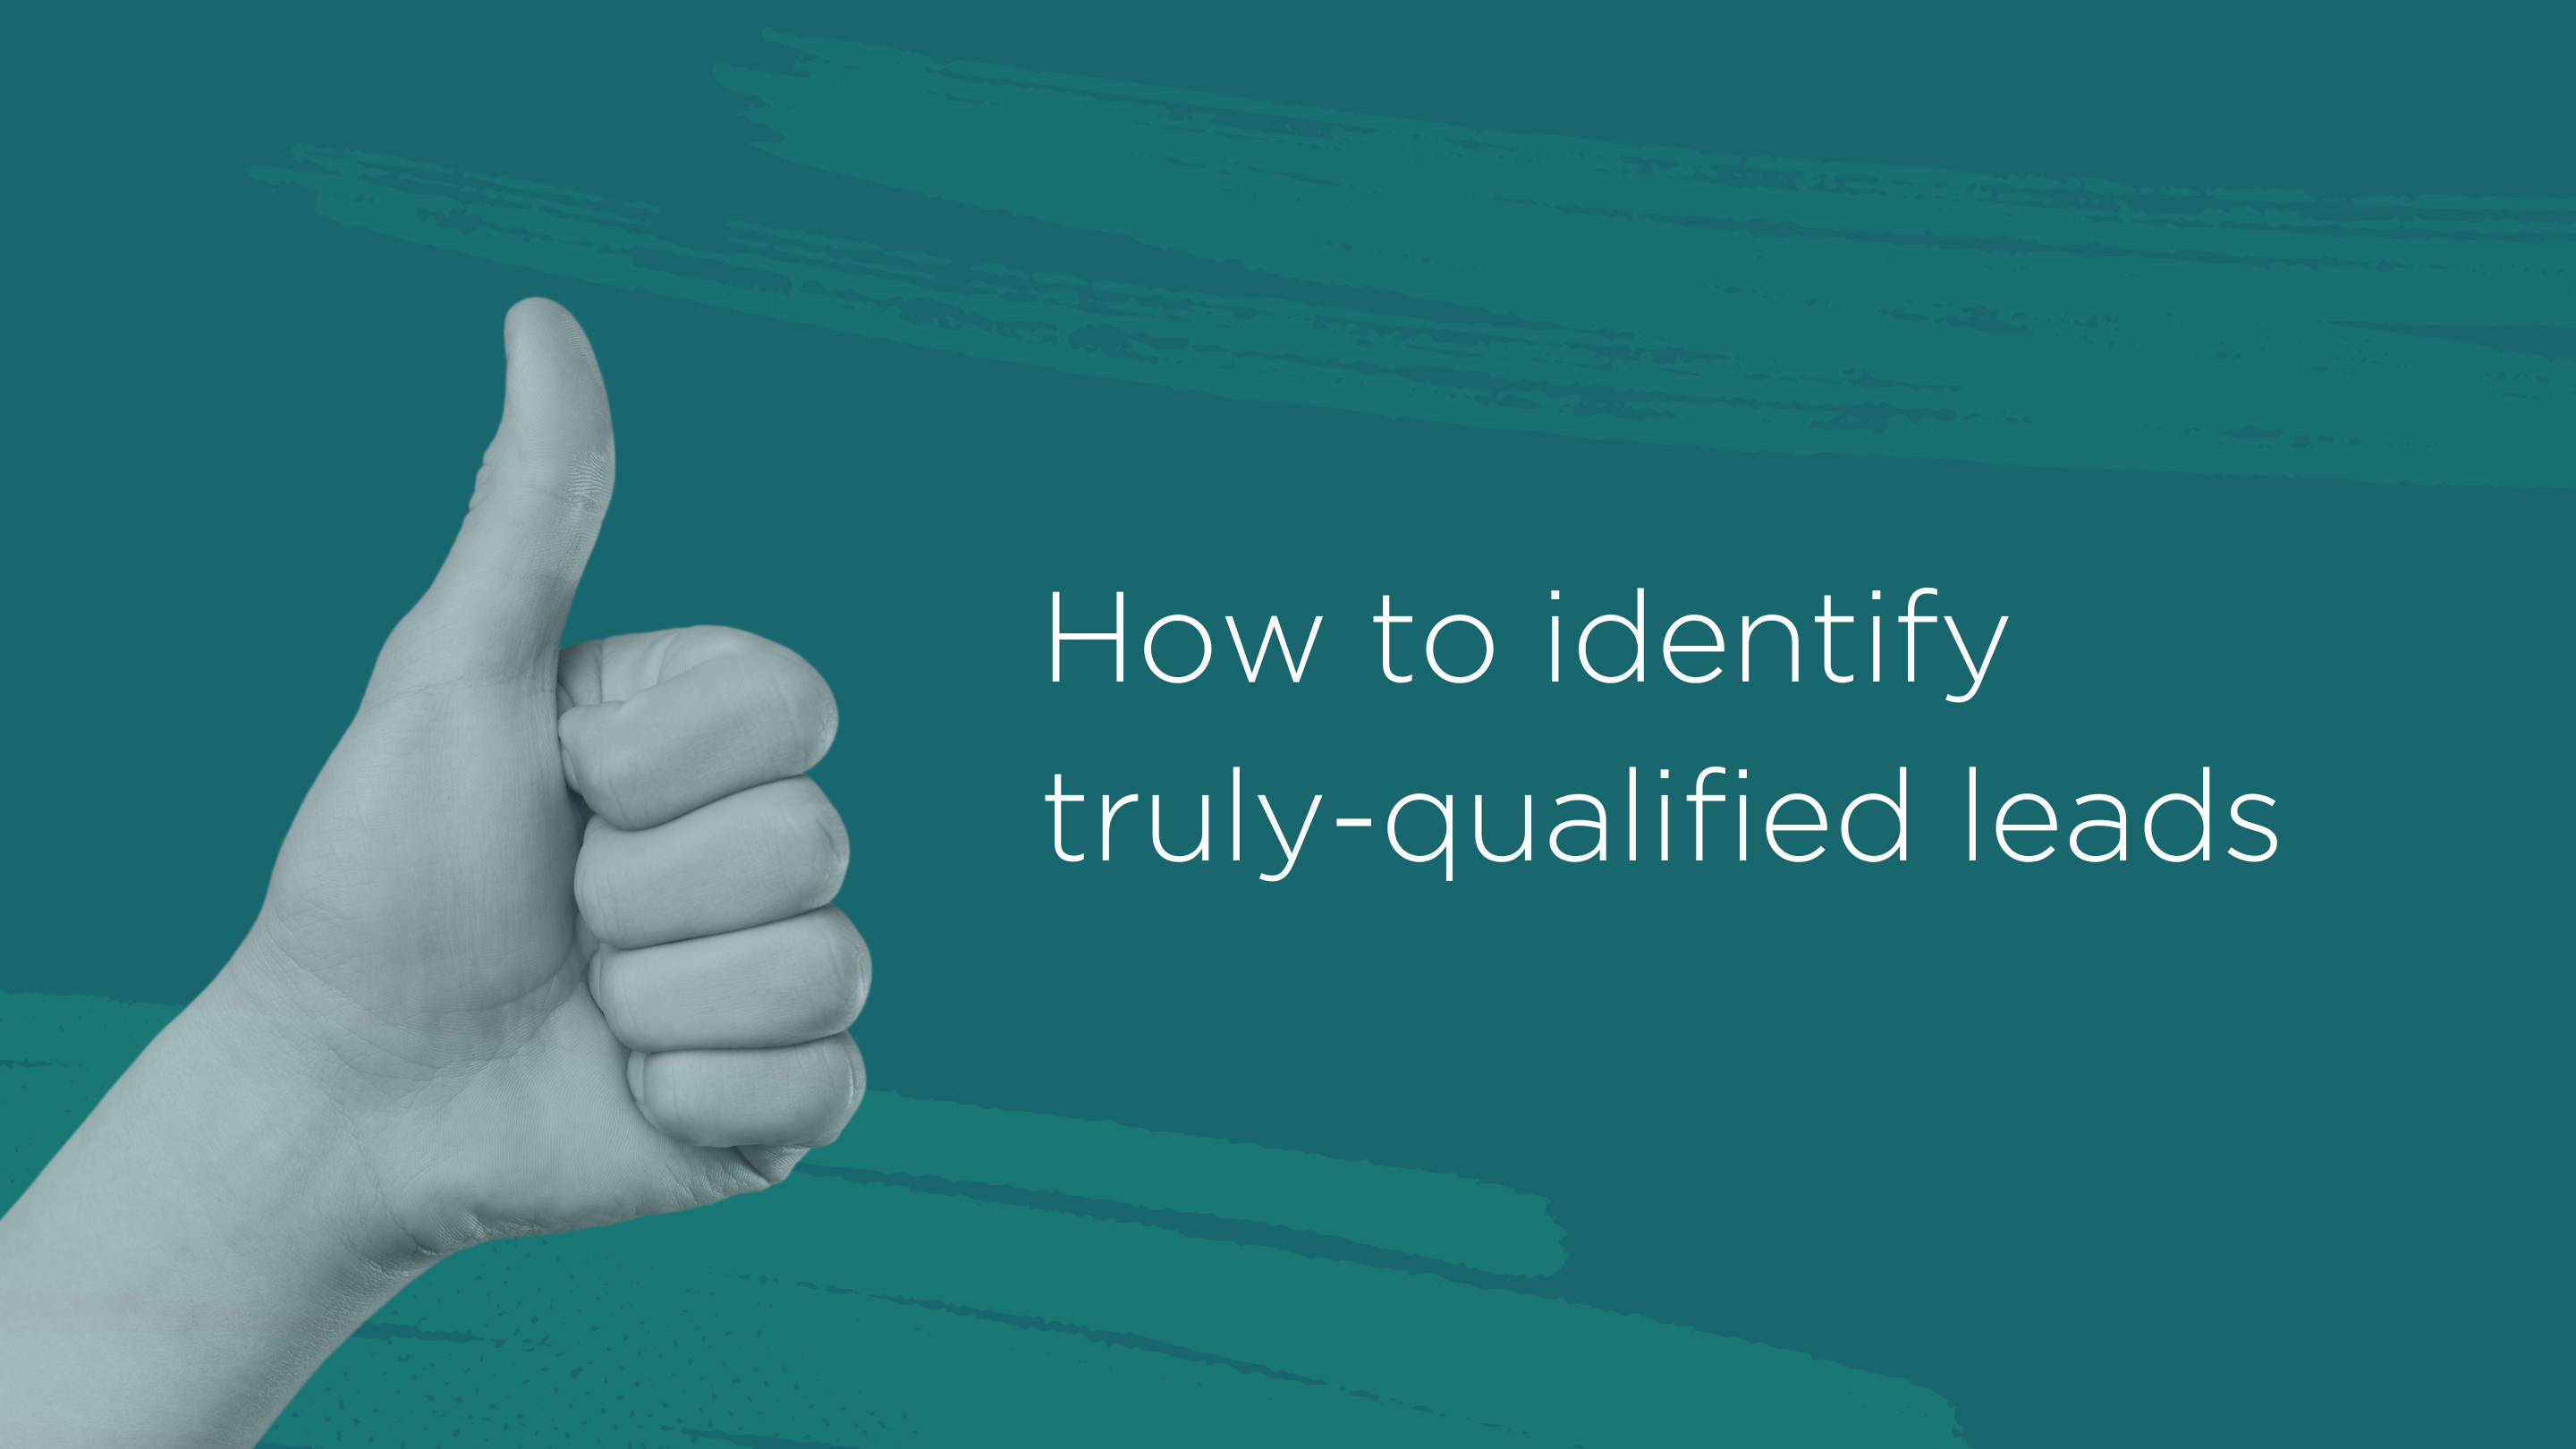 How to identify truly-qualified leads